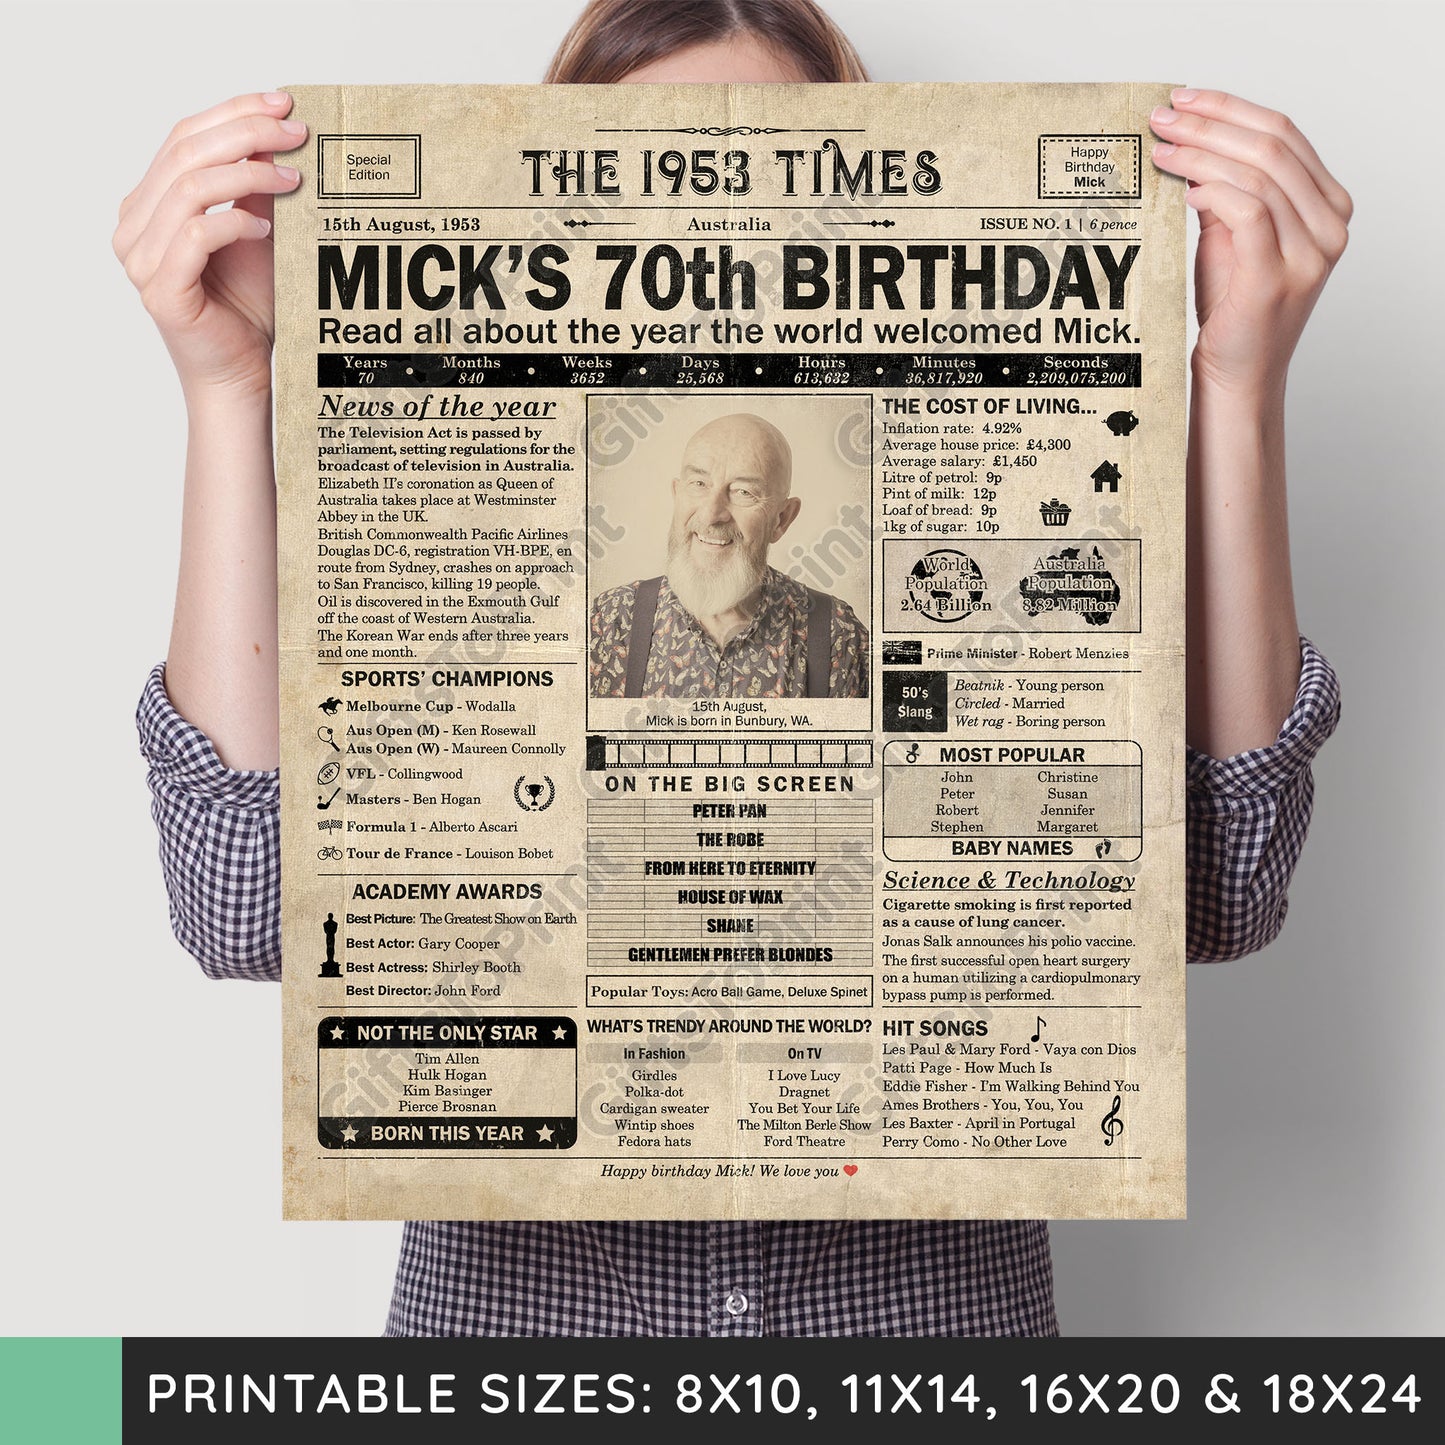 Personalised 70th Birthday Gift: A Printable AUSTRALIAN Birthday Poster of 1953